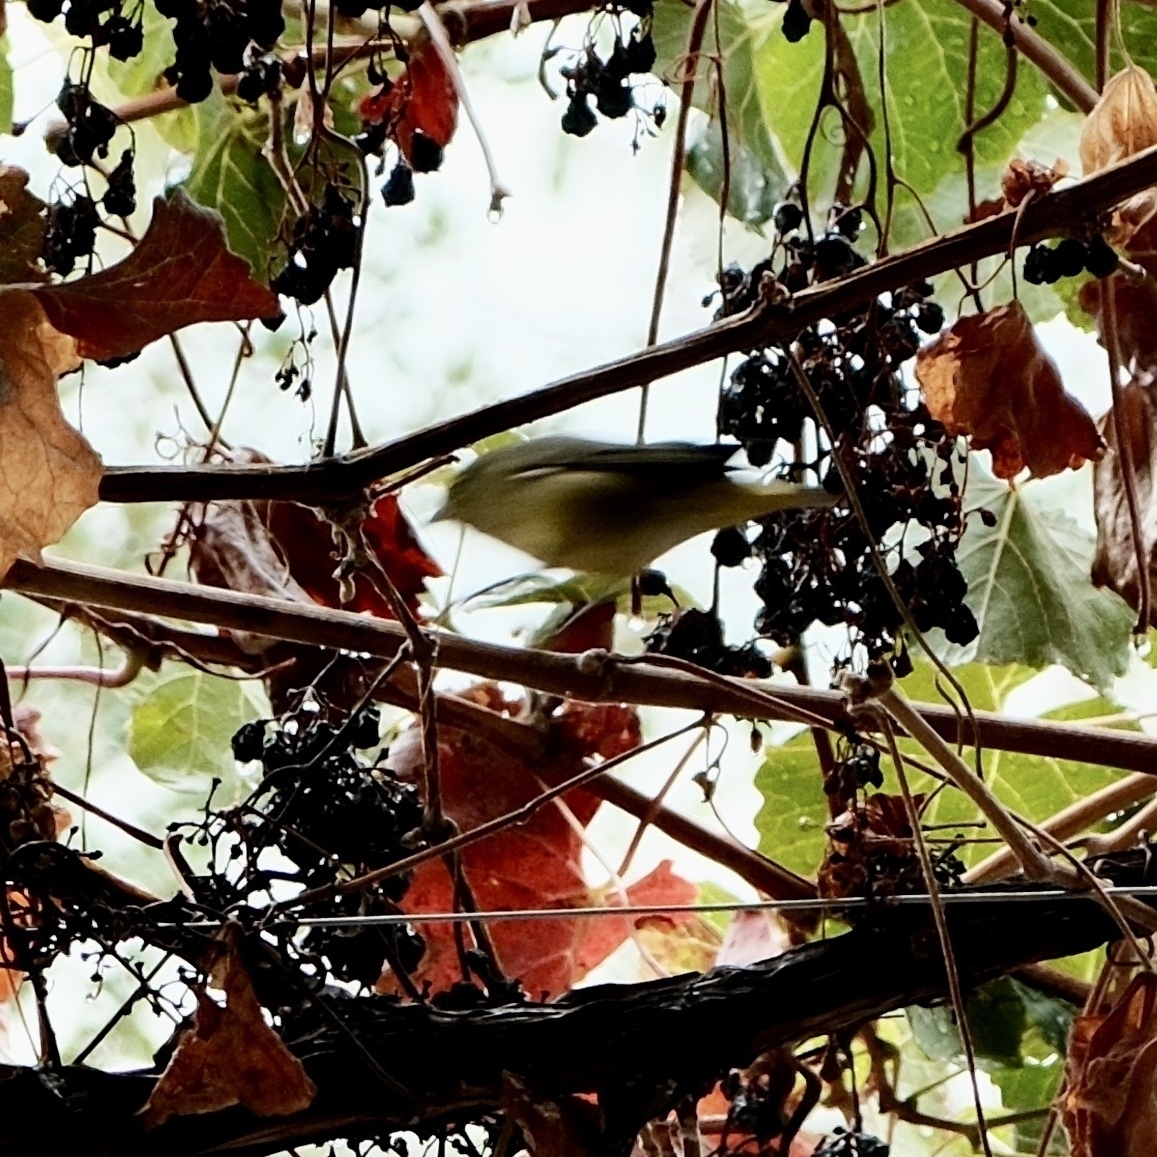 a yellowish Kinglet bird in a geape vine surrounded by grapes.